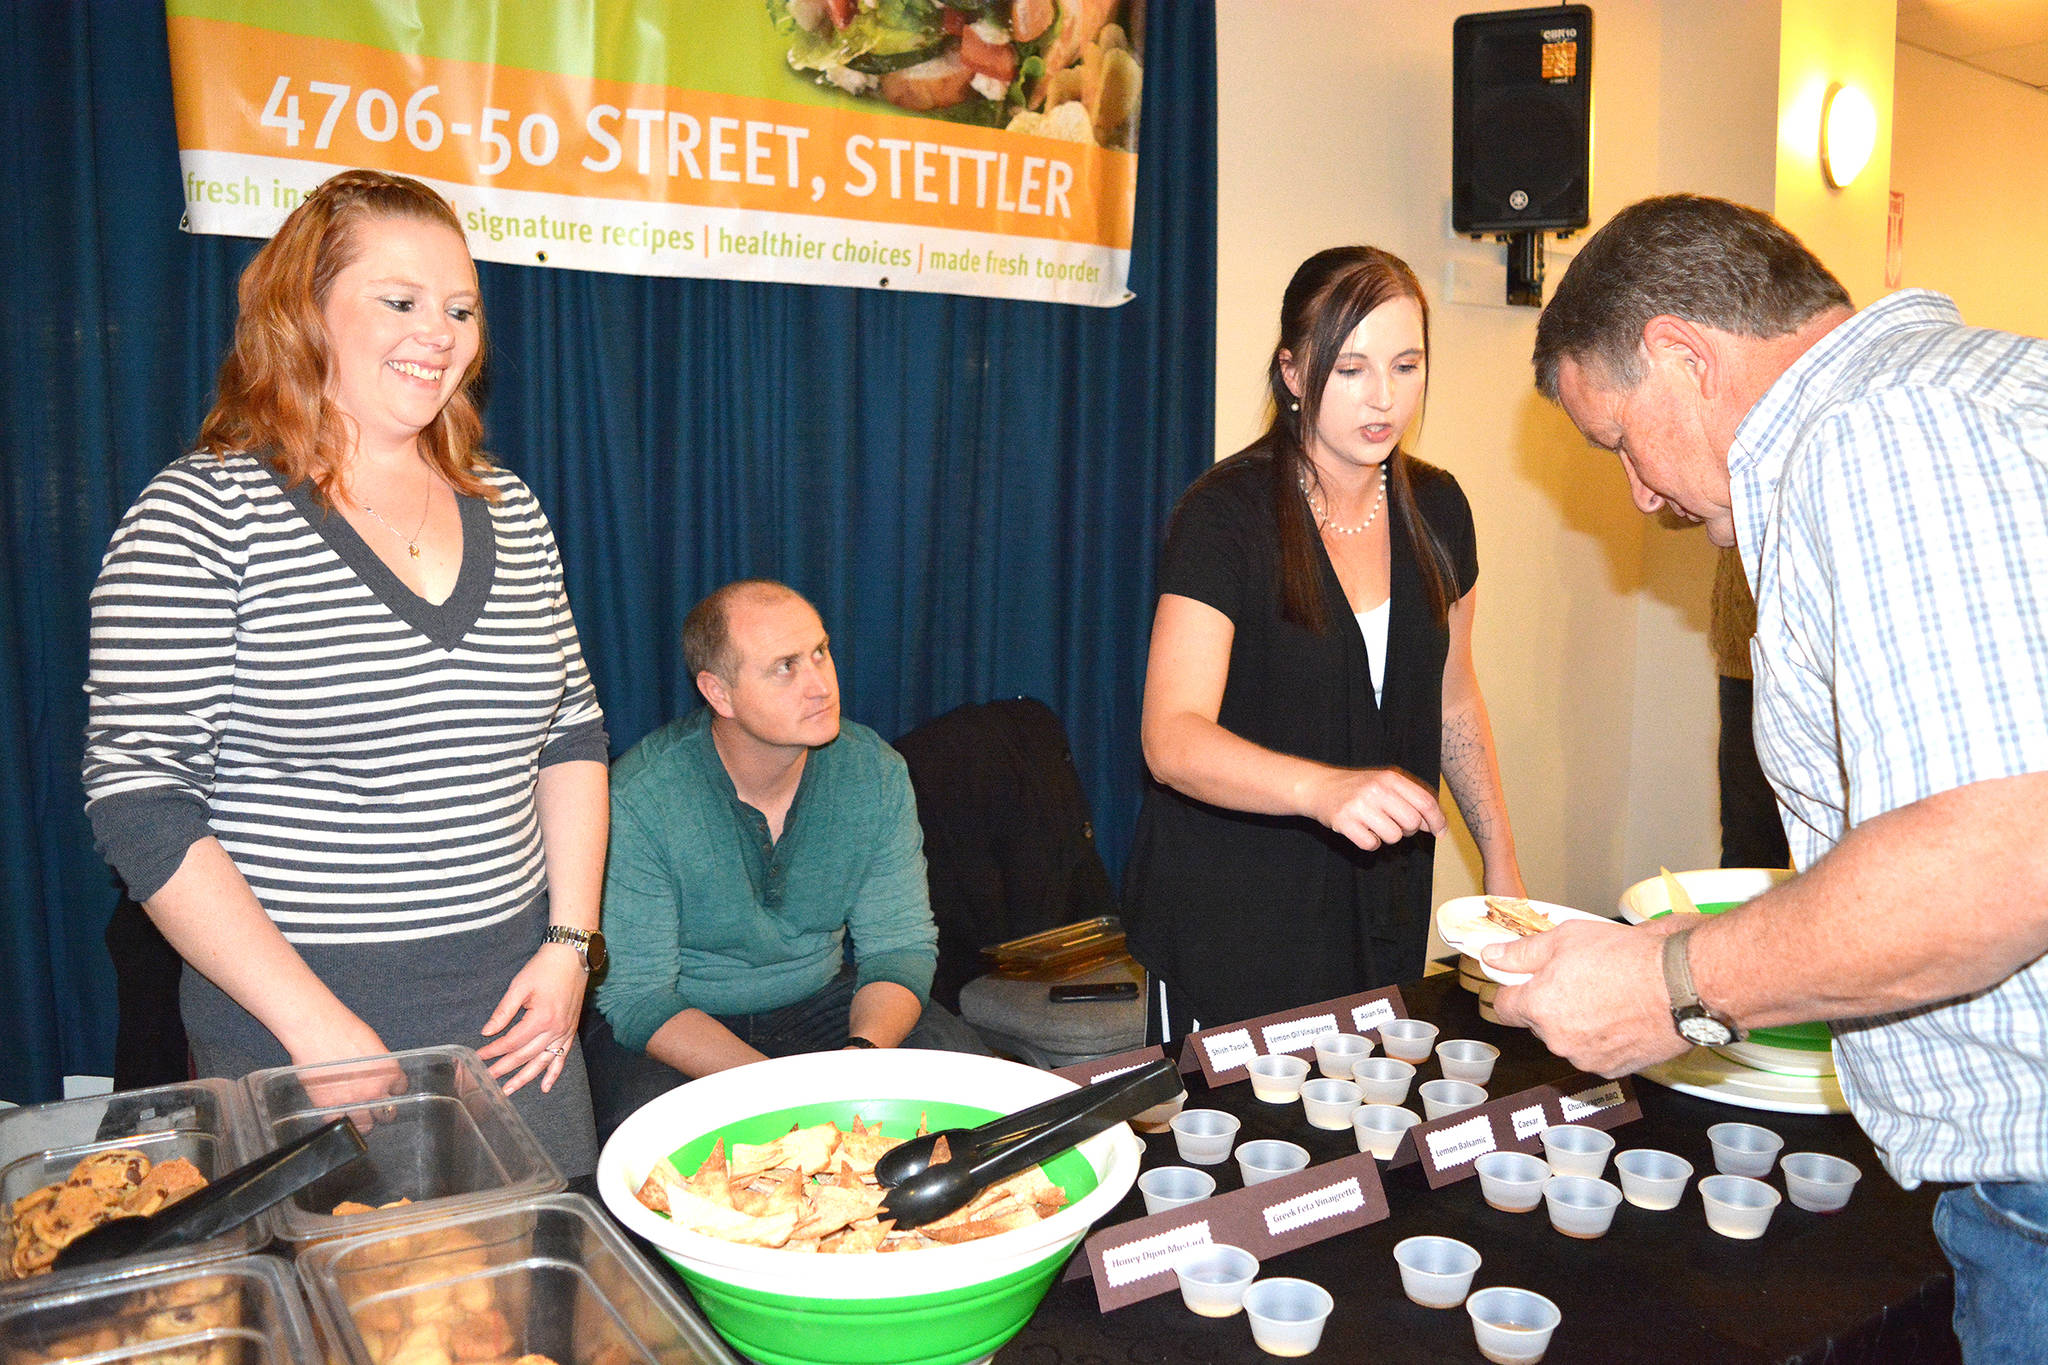 The Stettler Pita Pit served up appetizers at the Taste of Stettler event at the Hub on Sept. 21. From the Pita Pit are, from left, Amanda Ollerhead, Richard Ollerhead and Jaime Comchi. On the right Colin Brausen fills his plate with samples. Lisa Joy/Stettler Independent